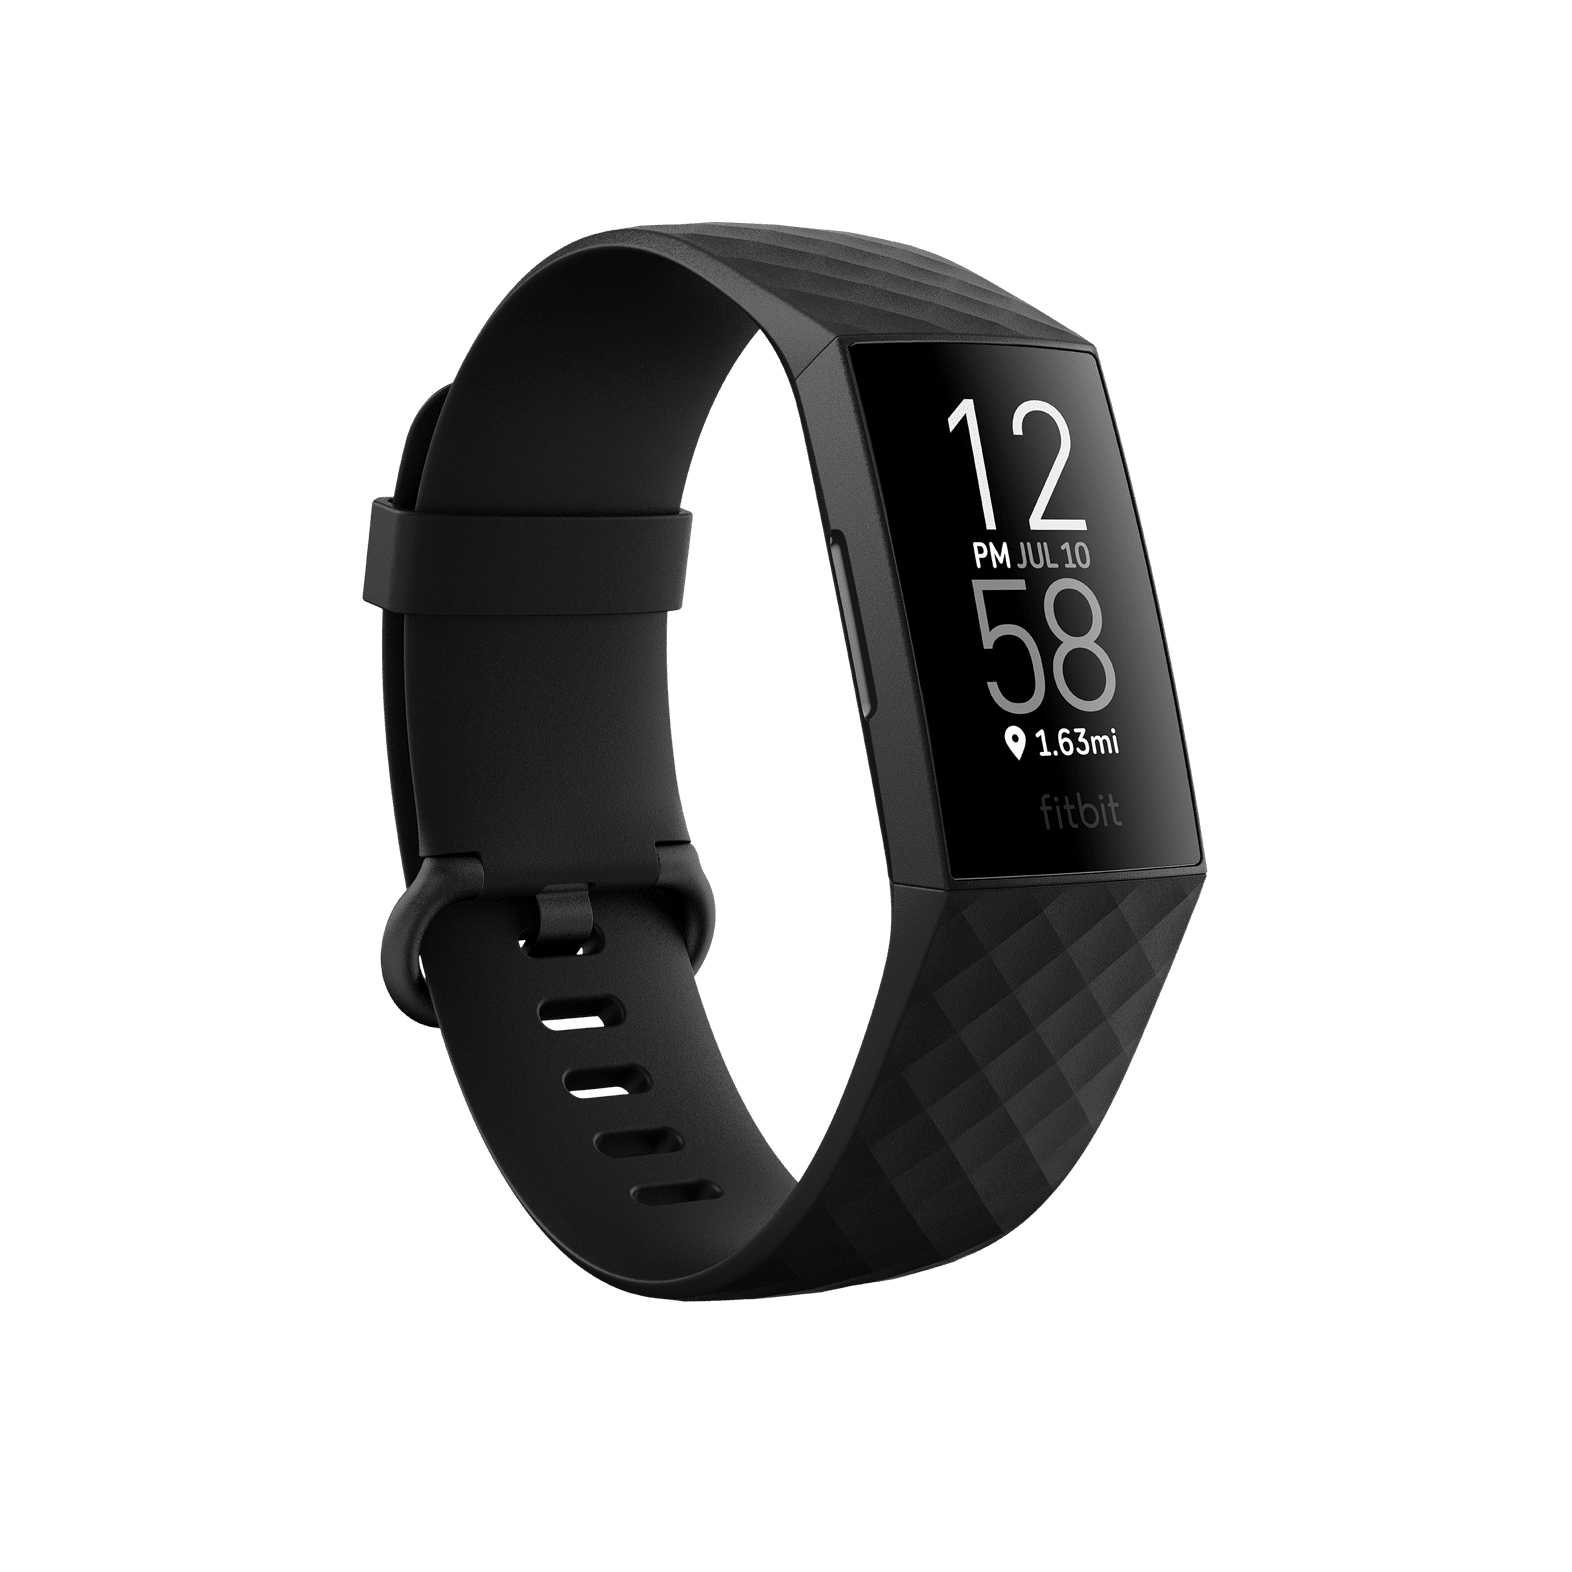 Shop Smartwatches, Fitness Trackers 